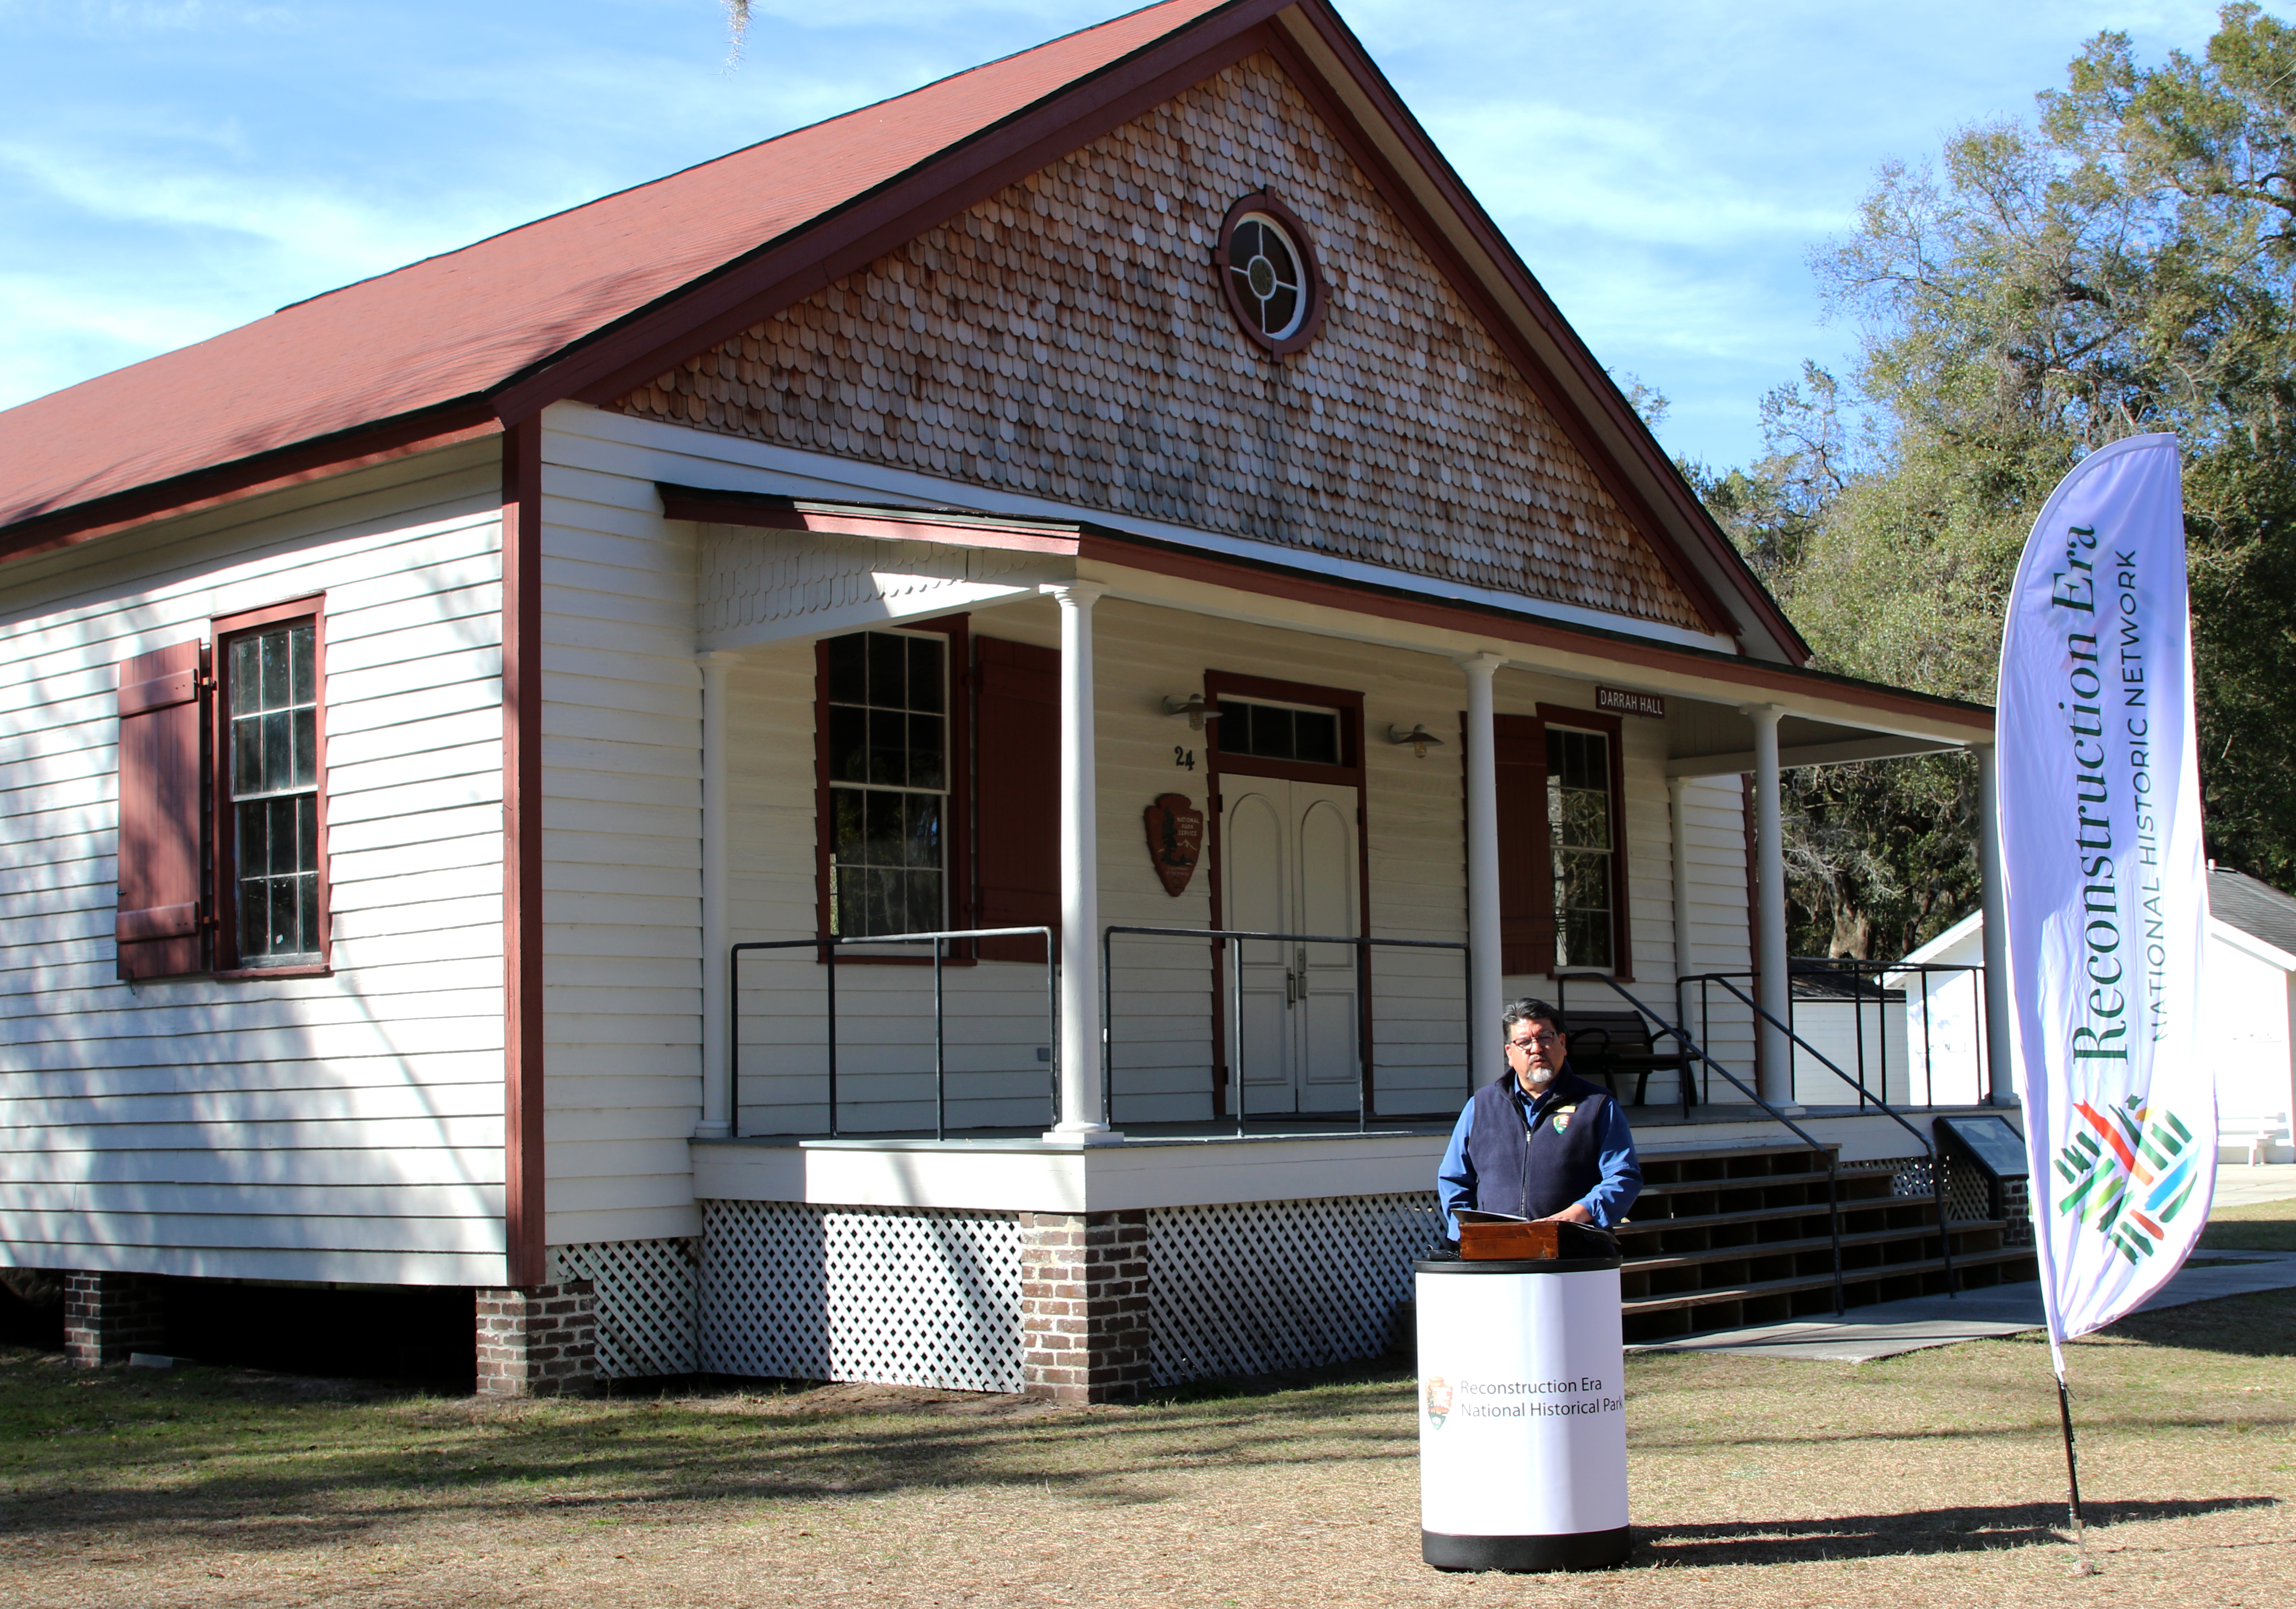 Director Sams stands in front of a long white building with red trim, a large front porch and wood shingled soffit.